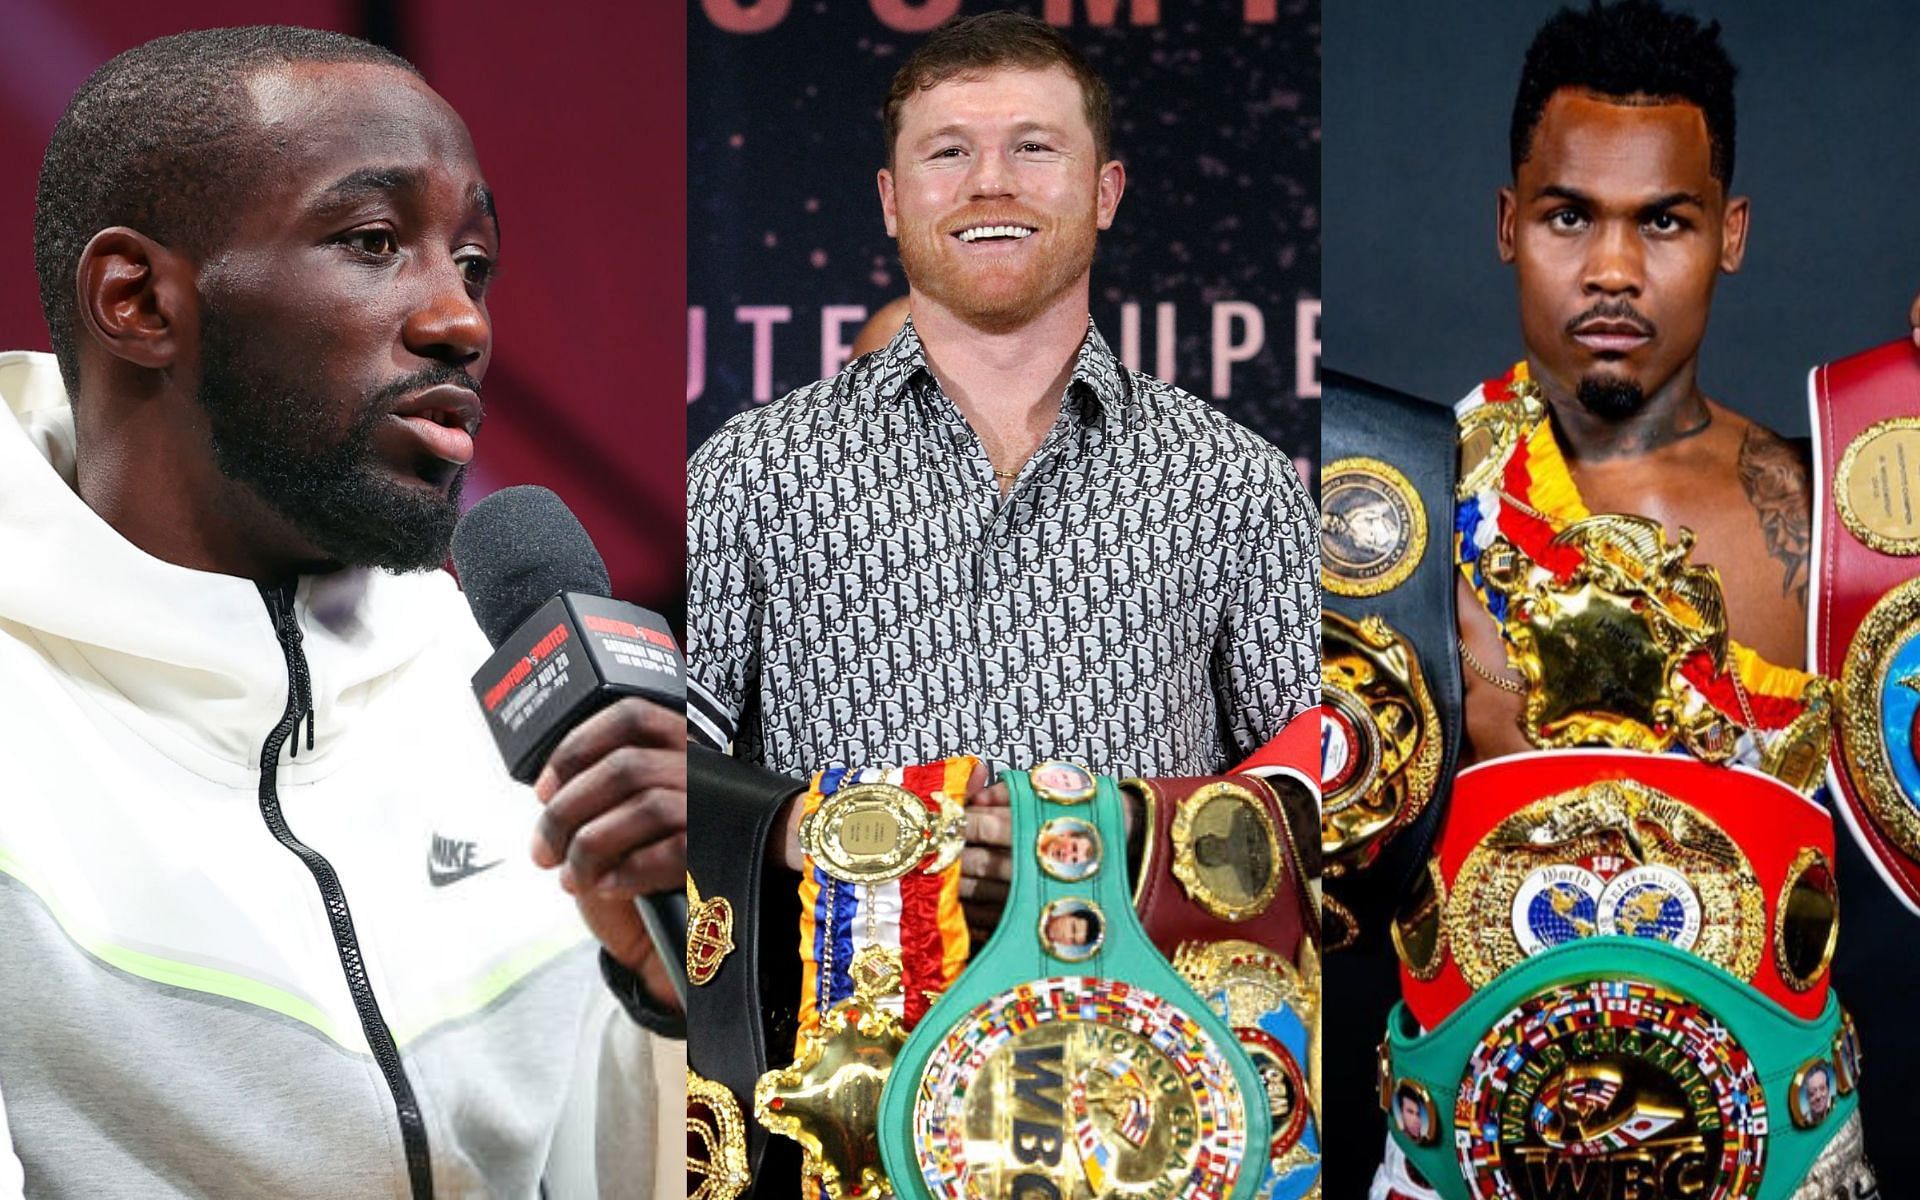 Terence Crawford predicts a close fight between Canelo Alvarez and Jermell Charlo